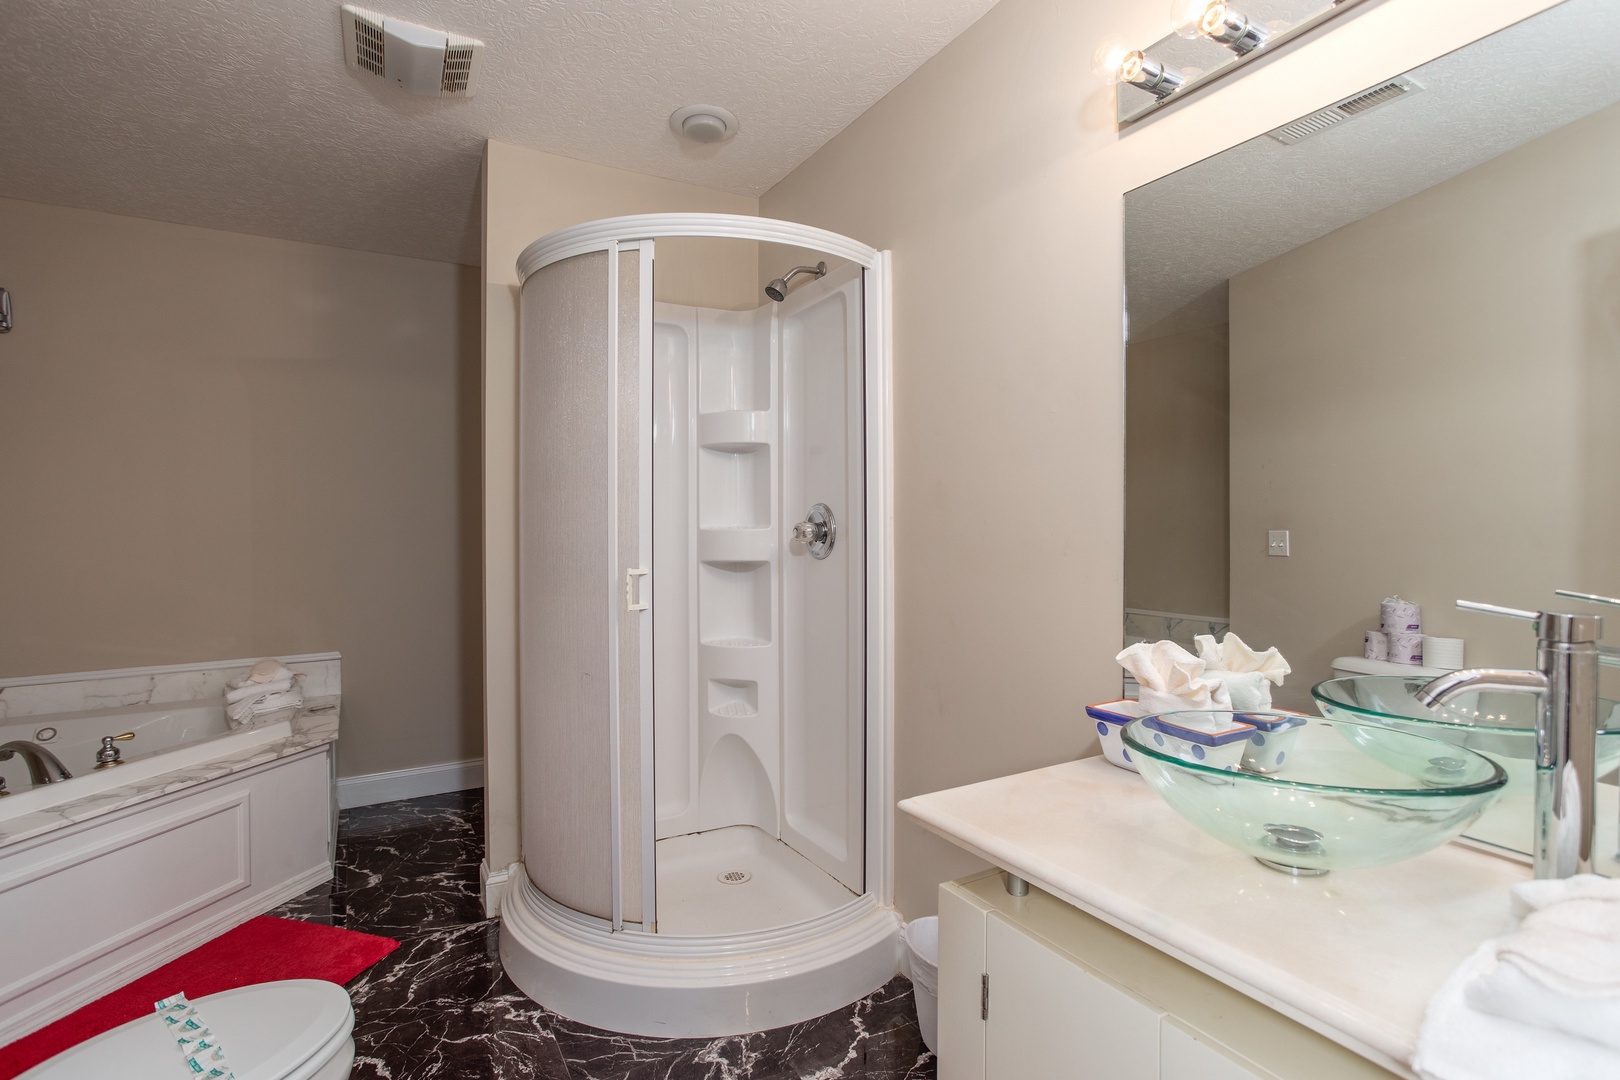 Jacuzzi in a corner with a separate shower in the bathroom at Into the Woods, a 3 bedroom cabin rental located in Pigeon Forge